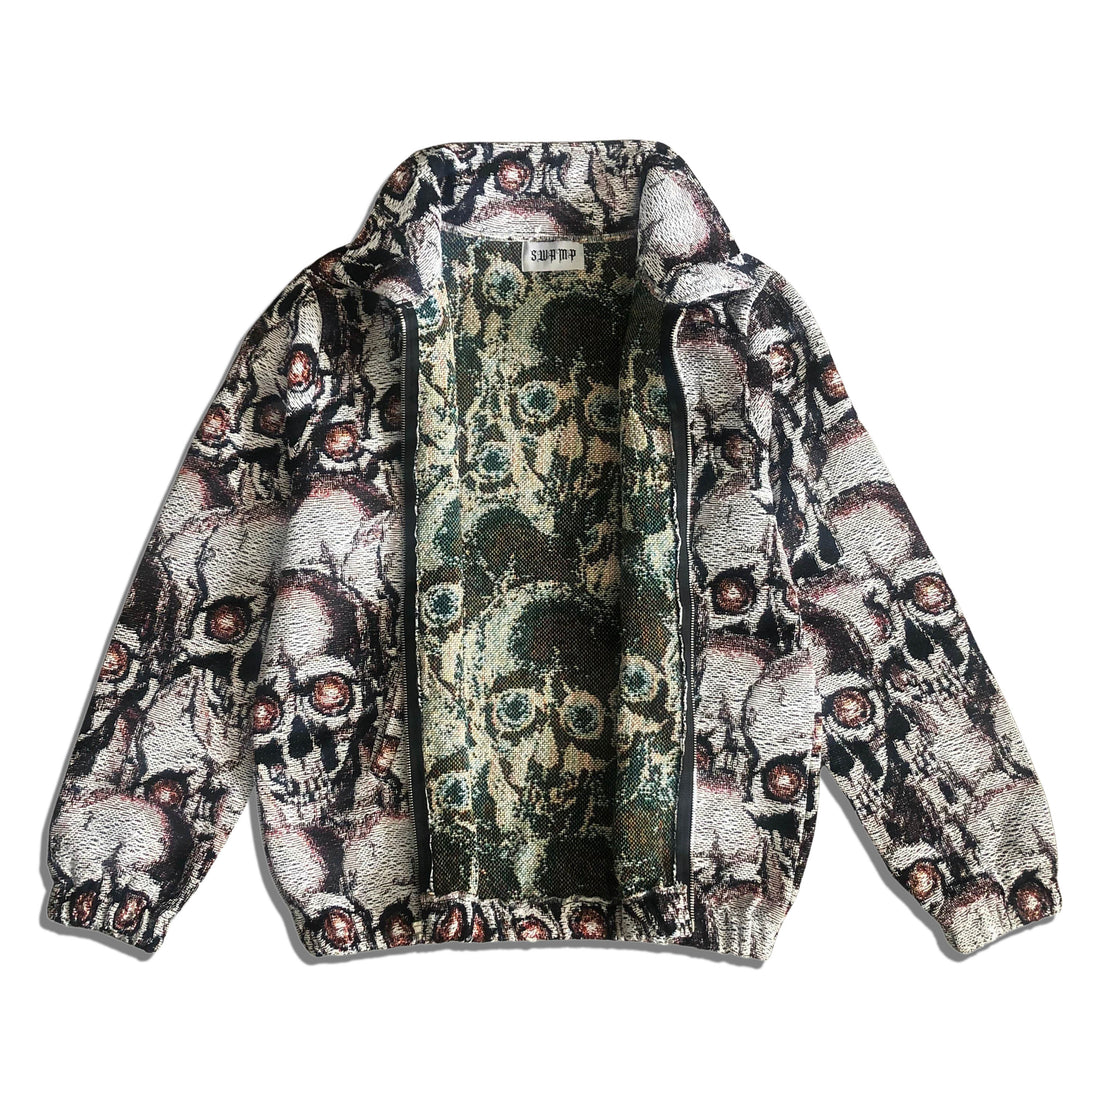 'Death Waits For No Man' Zip Up Sweater